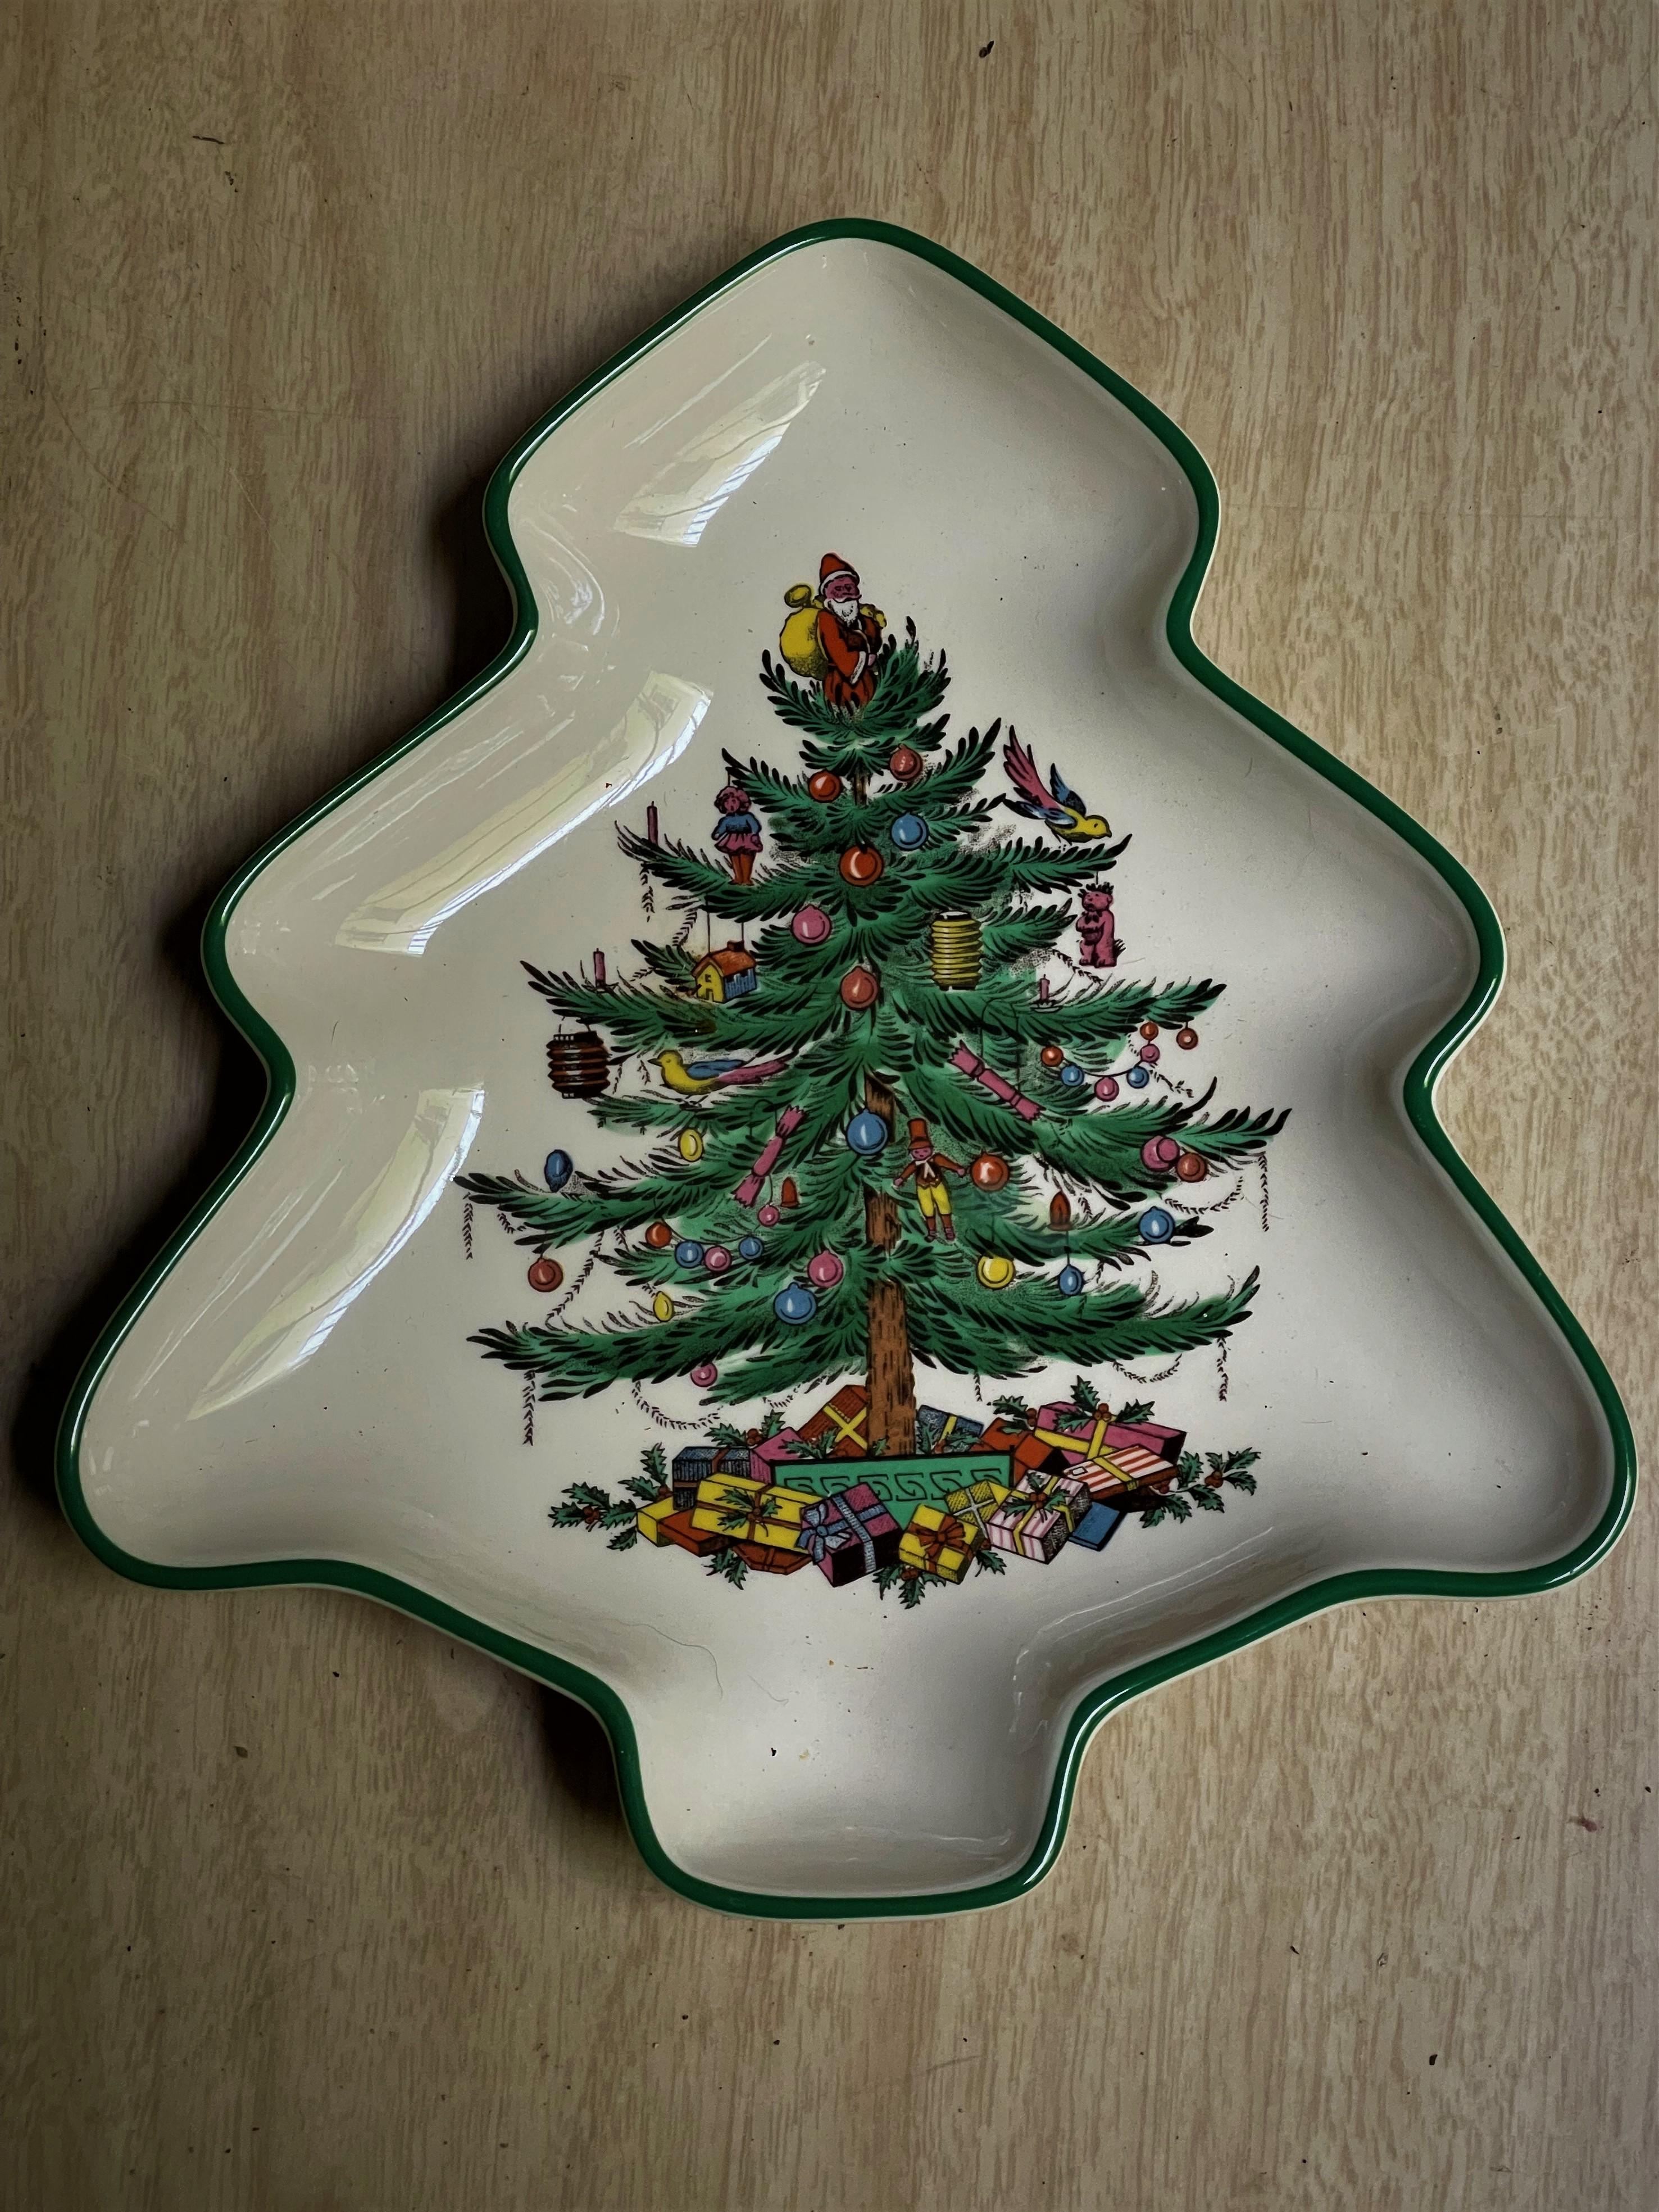 Here are a wonderfully festive pair of Spode porcelain in the Christmas Tree pattern, one is a round plate and the other a low bowl in the shape of a Christmas tree. This pattern was introduced in 1938 and became one the Spode's most popular. The